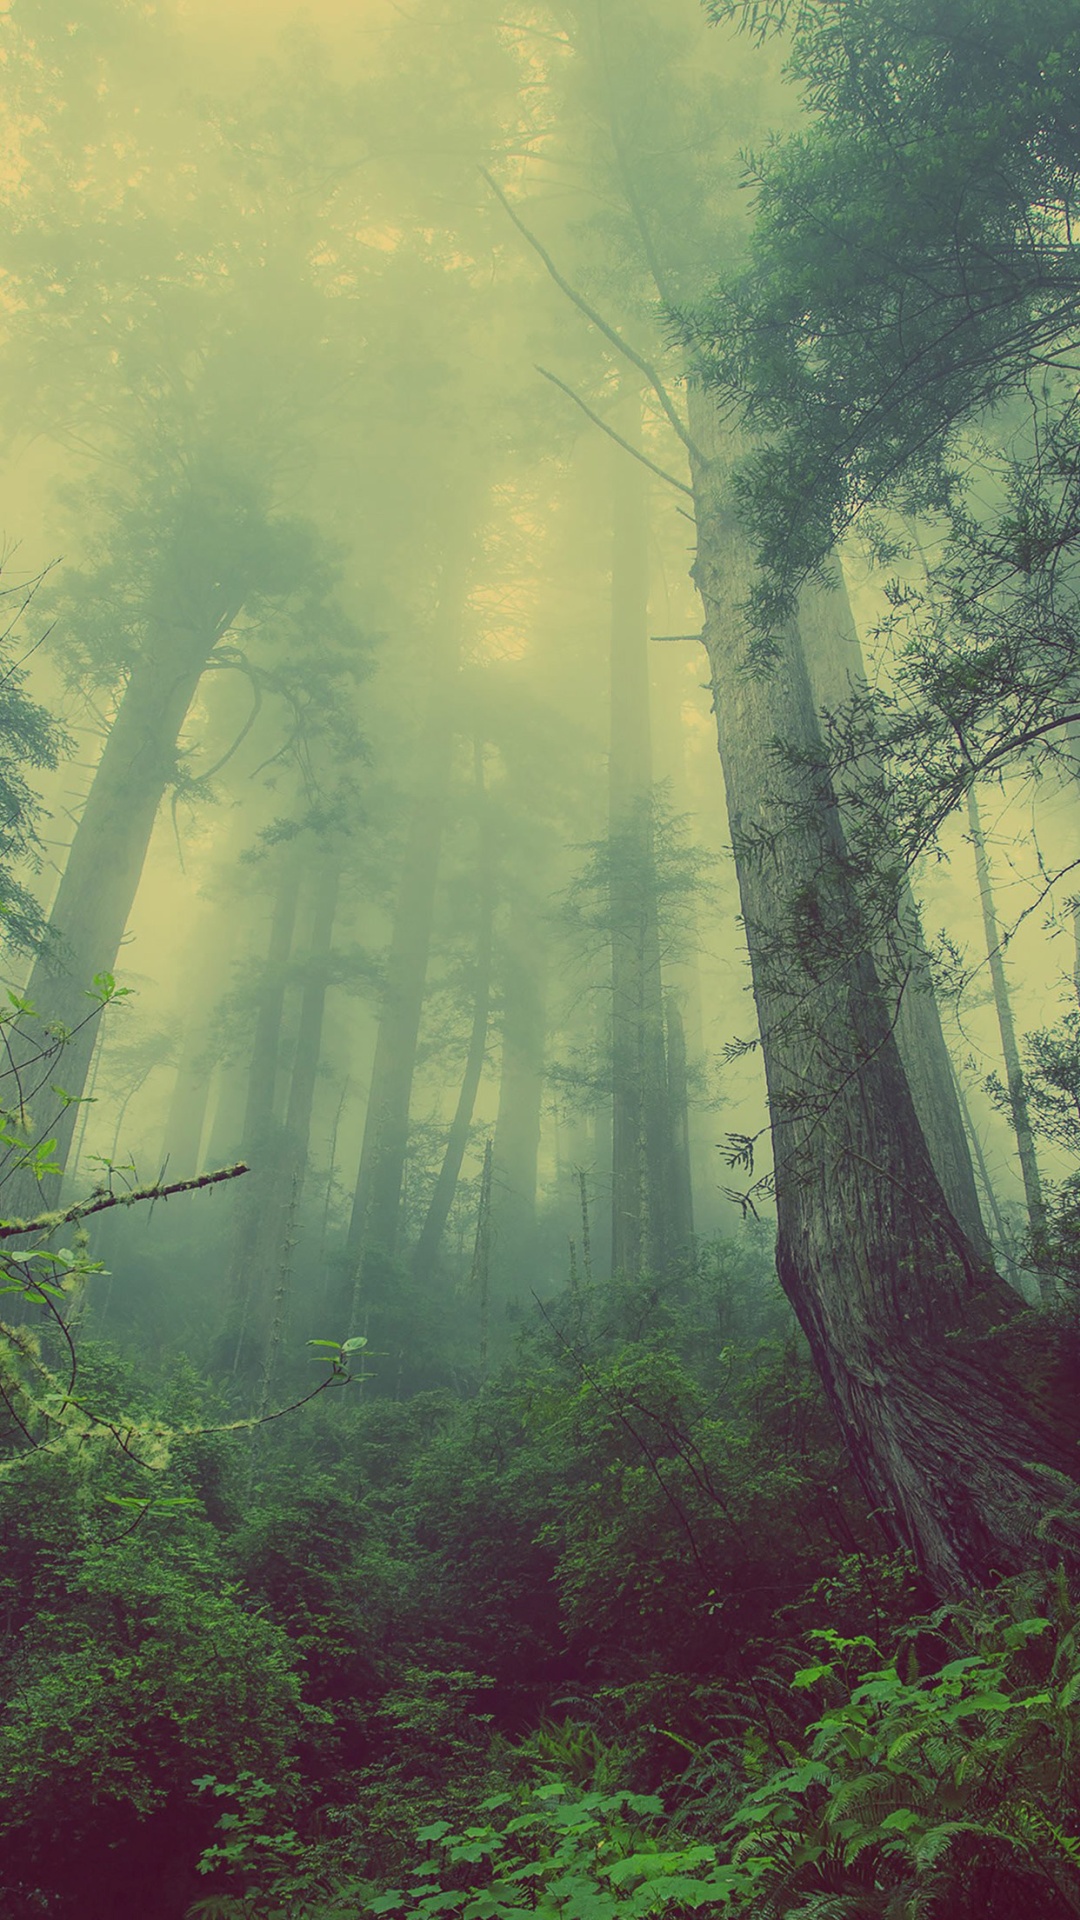 4к wallpapers,nature,forest,natural landscape,atmospheric phenomenon,old growth forest